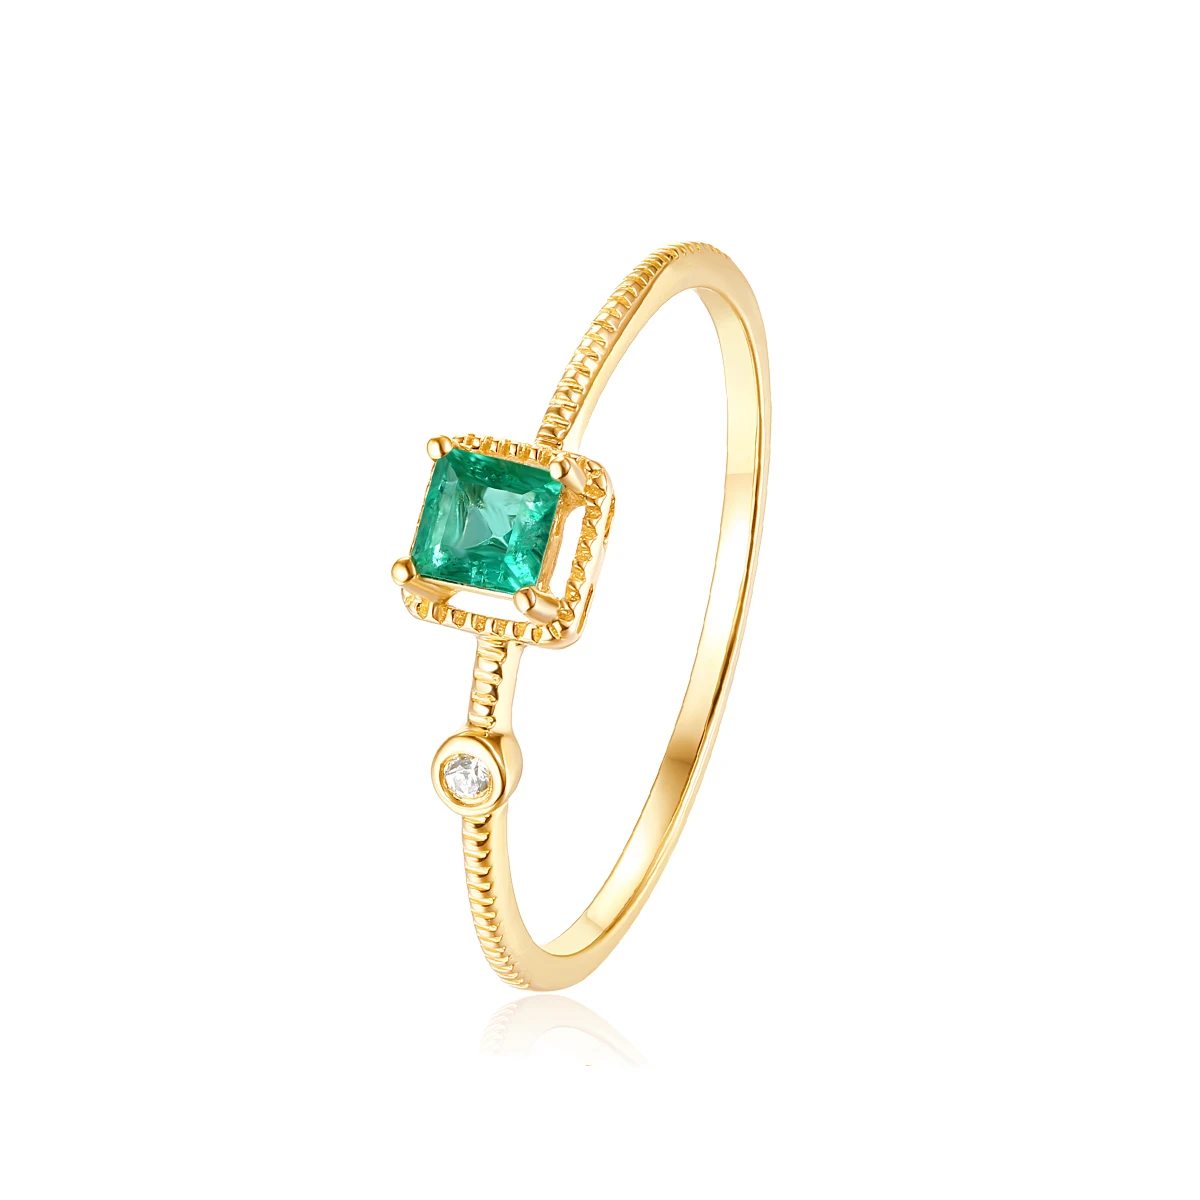 

Latest Simple thin wedding band design real 14K solid gold emerald ring, Yellow gold